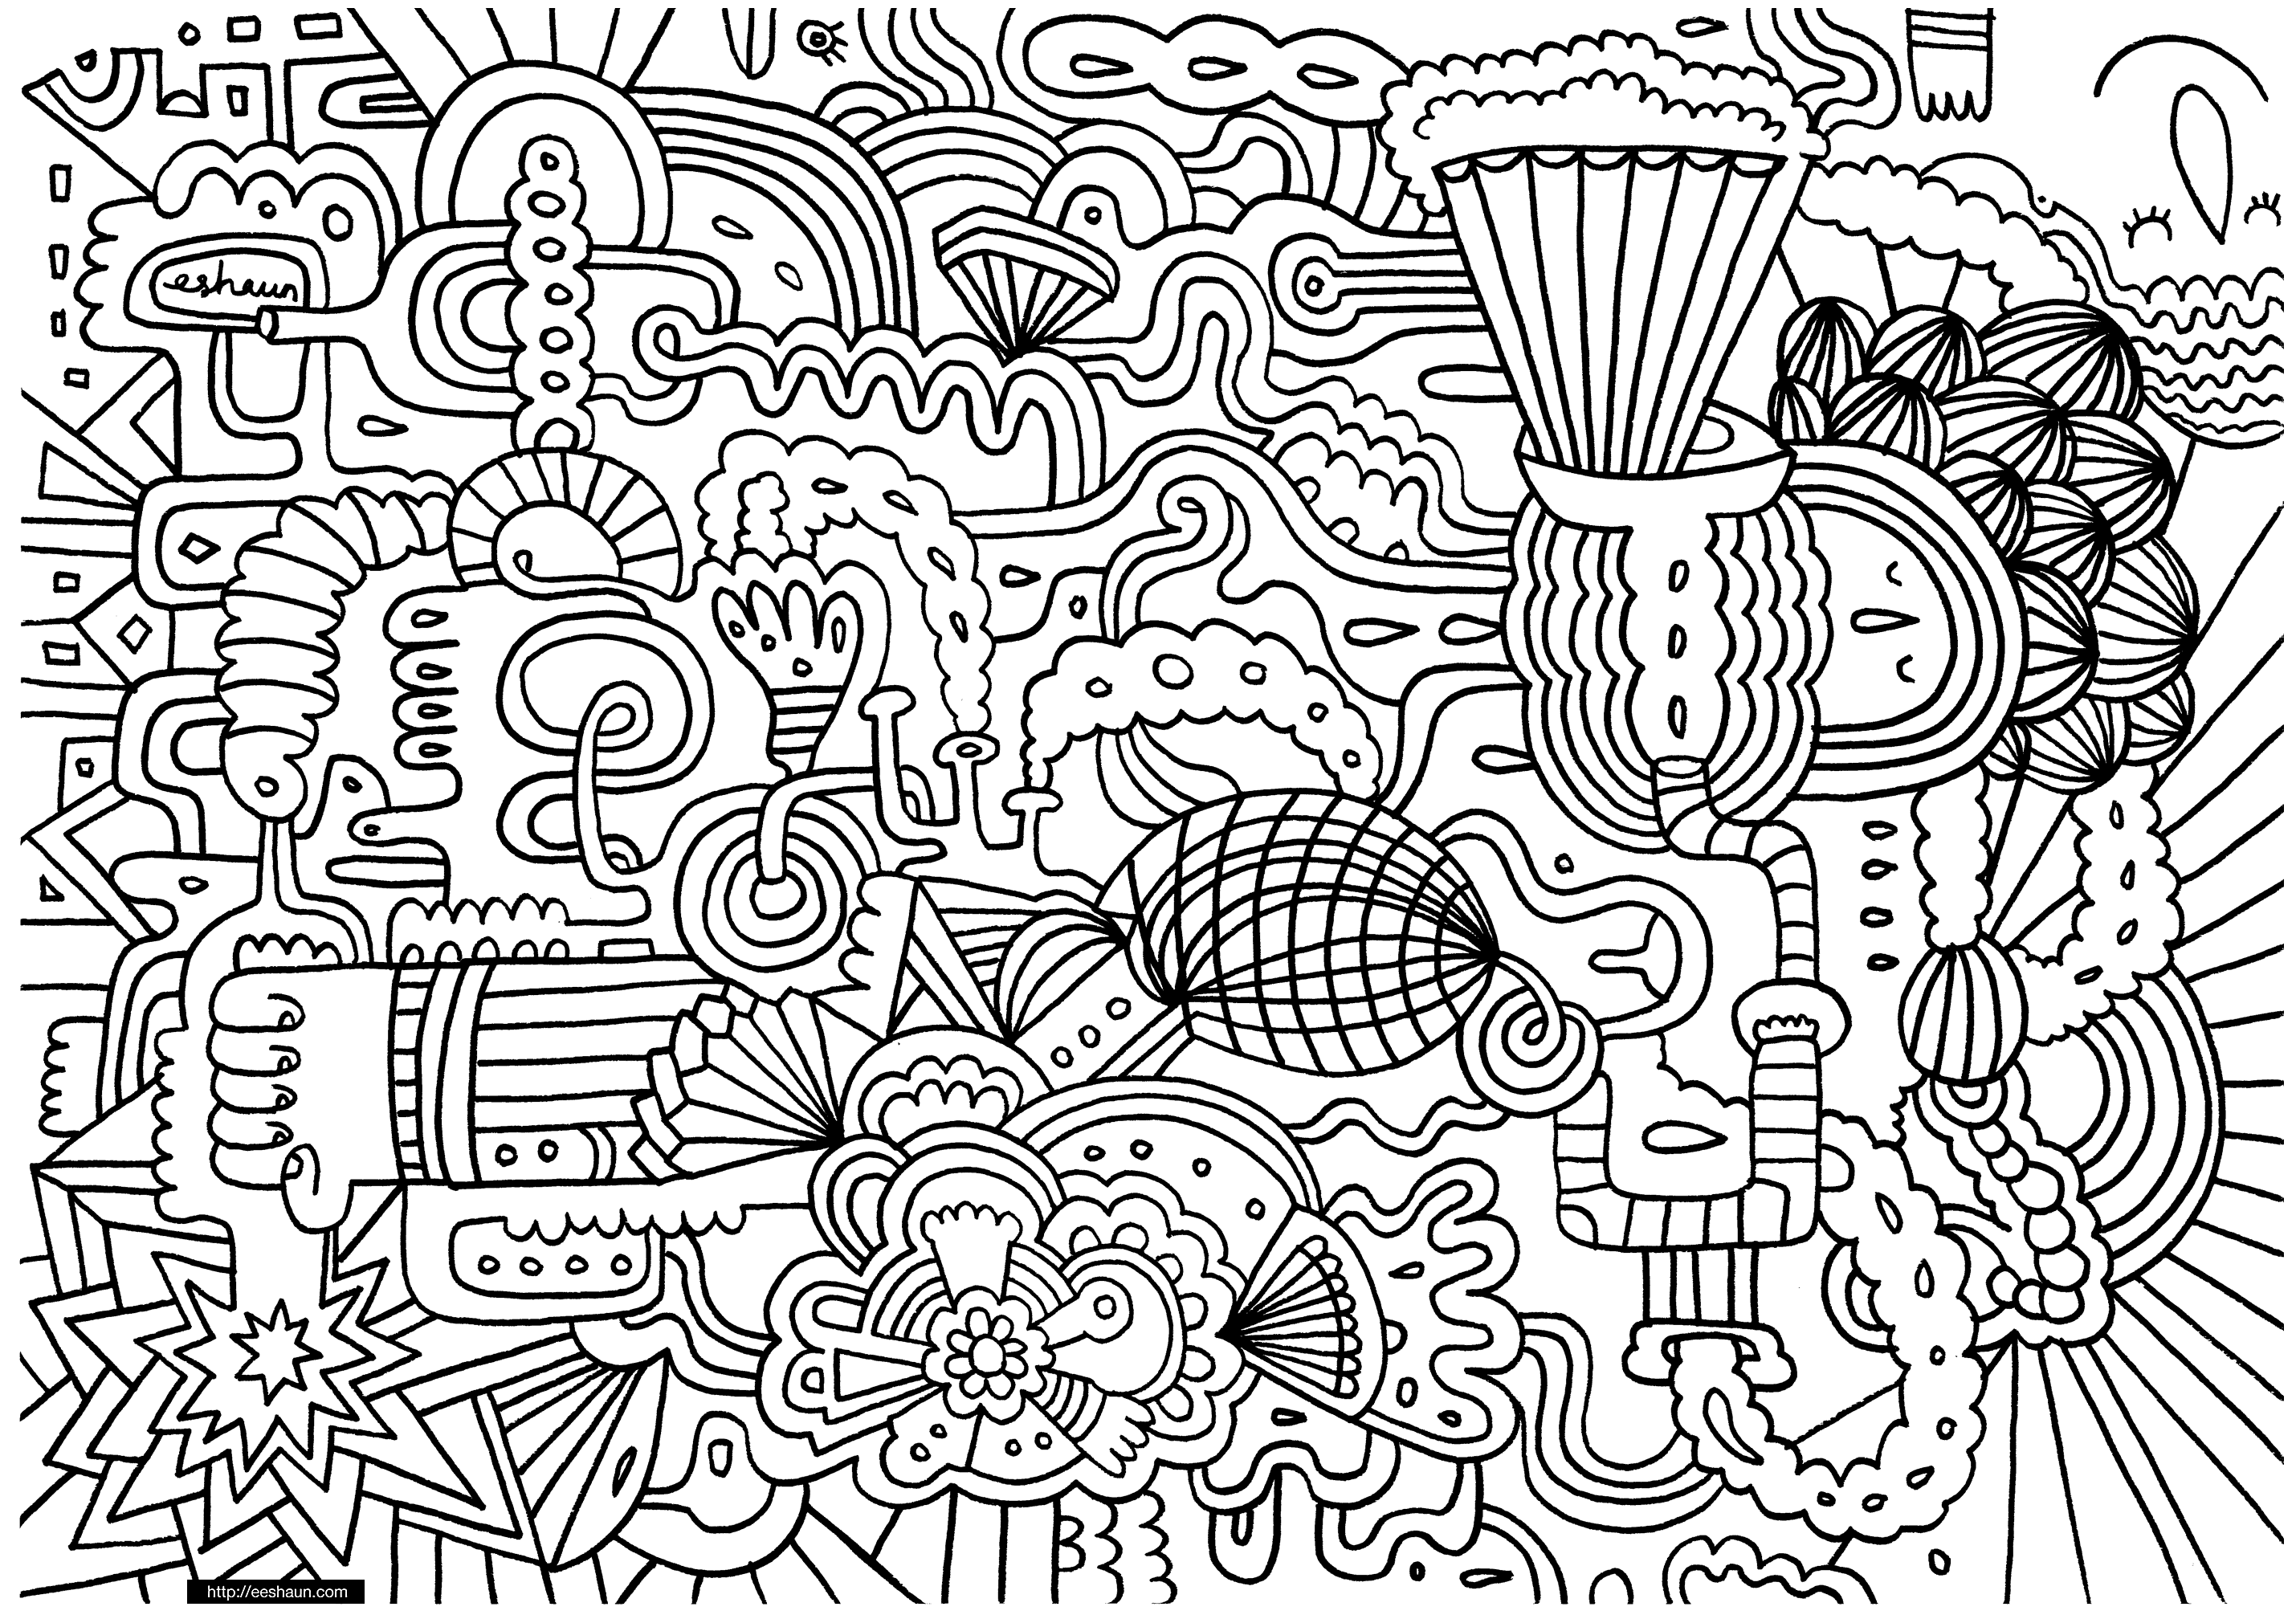 art pages to color doodle art for children doodle art kids coloring pages pages art to color 